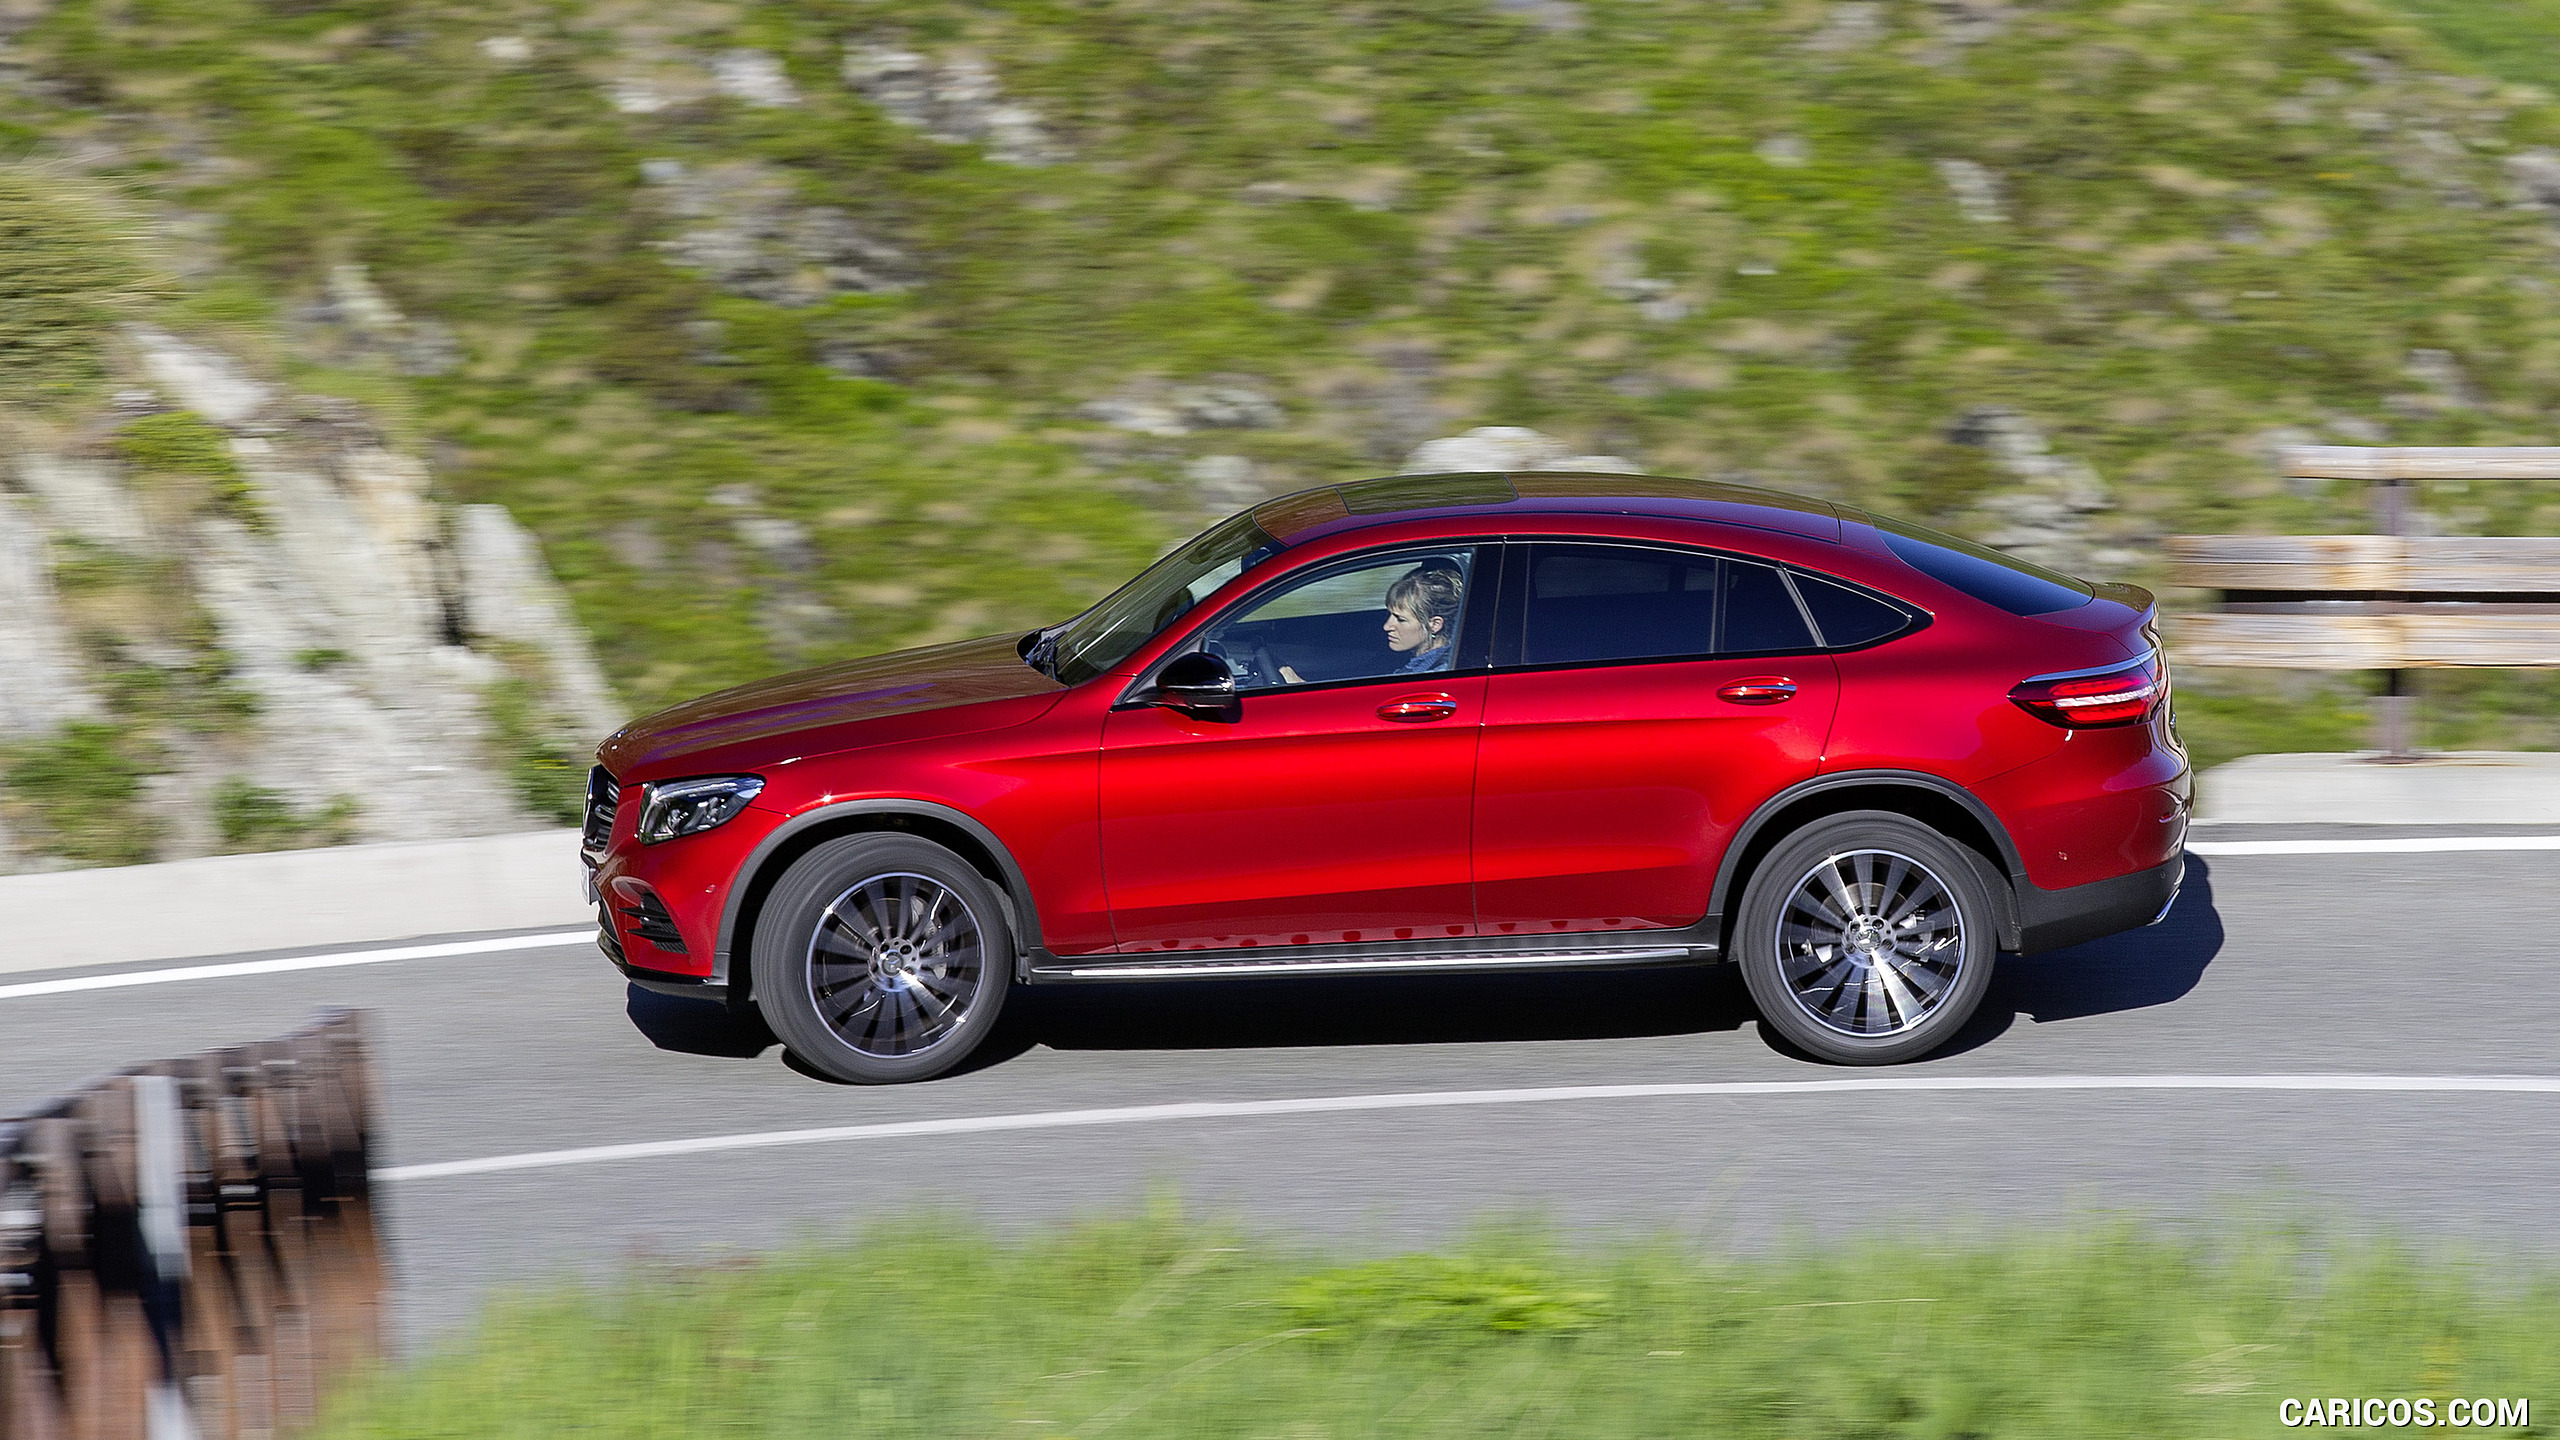 2017 Mercedes-Benz GLC 350 d Coupe (Diesel; Color: Hyacinth Red) - Side, #72 of 144